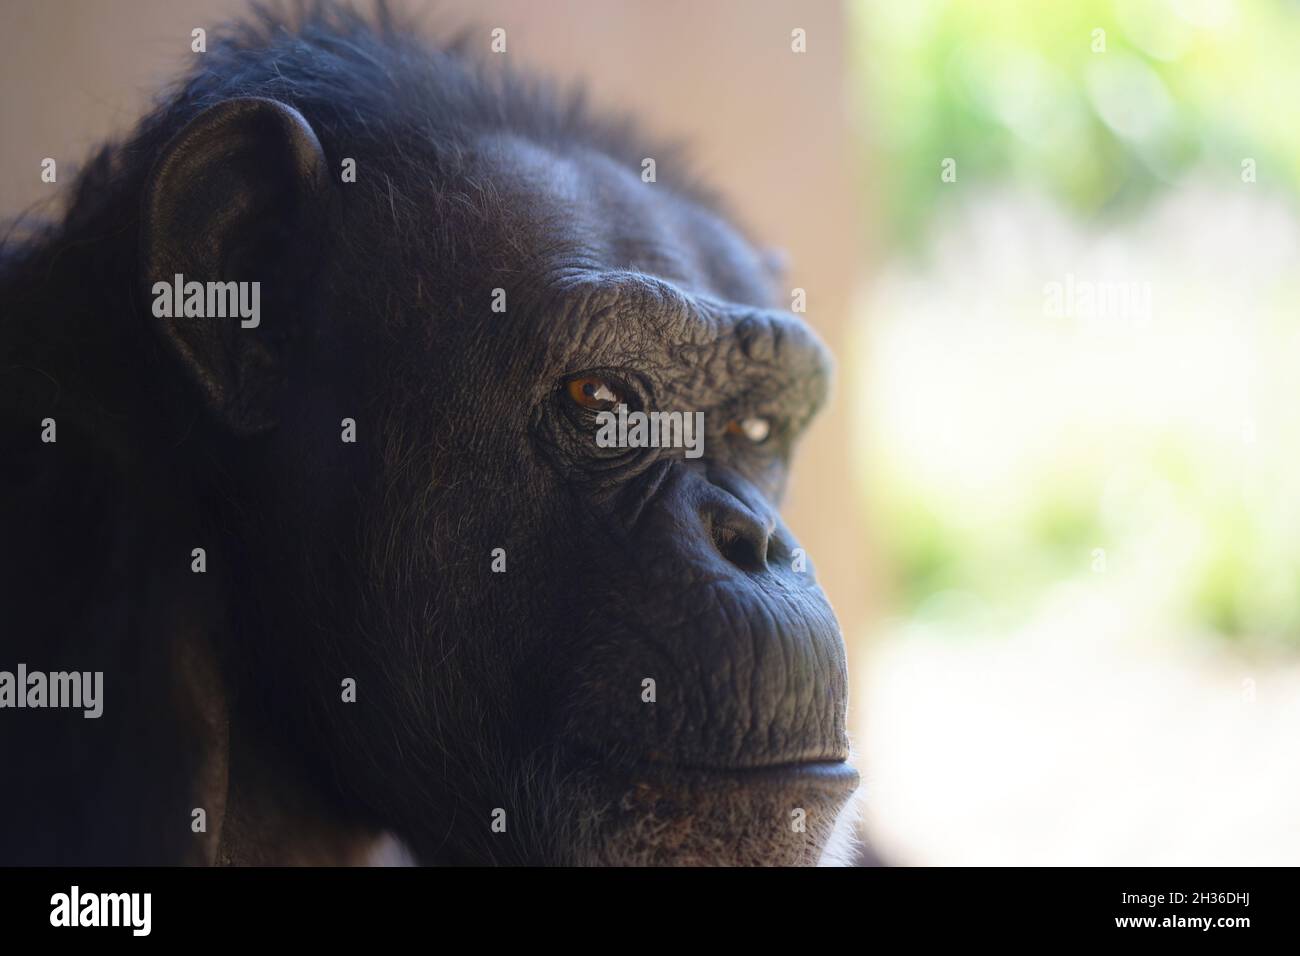 Portrait of a thoughtful pygmy chimpanzee in the blurred background Stock Photo